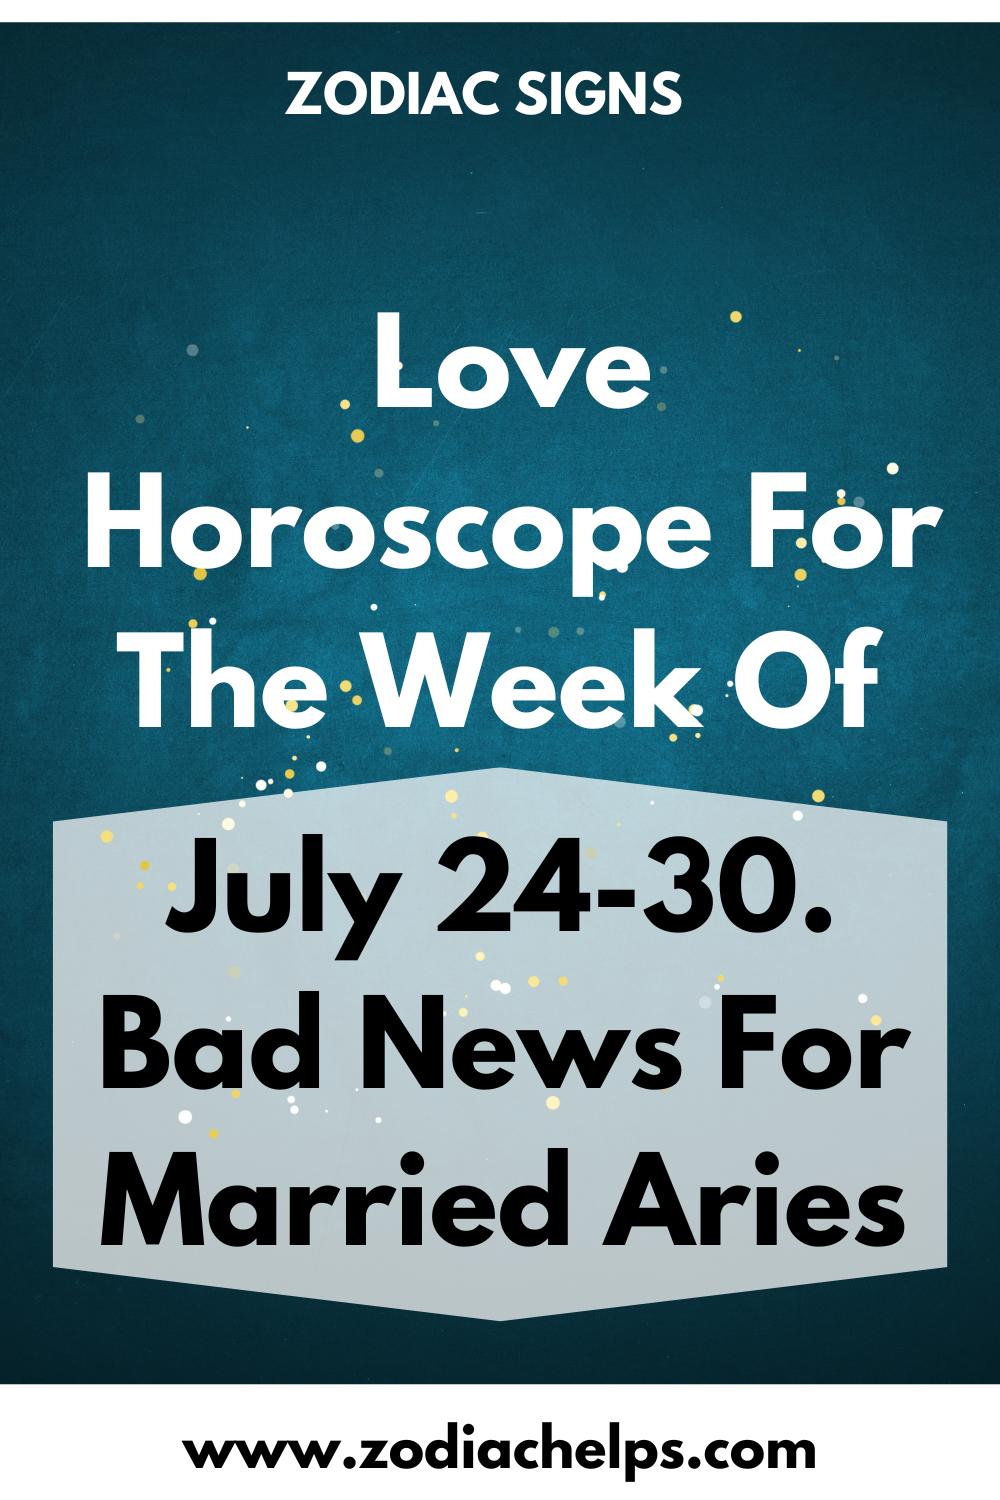 Love Horoscope For The Week Of July 24-30. Bad News For Married Aries